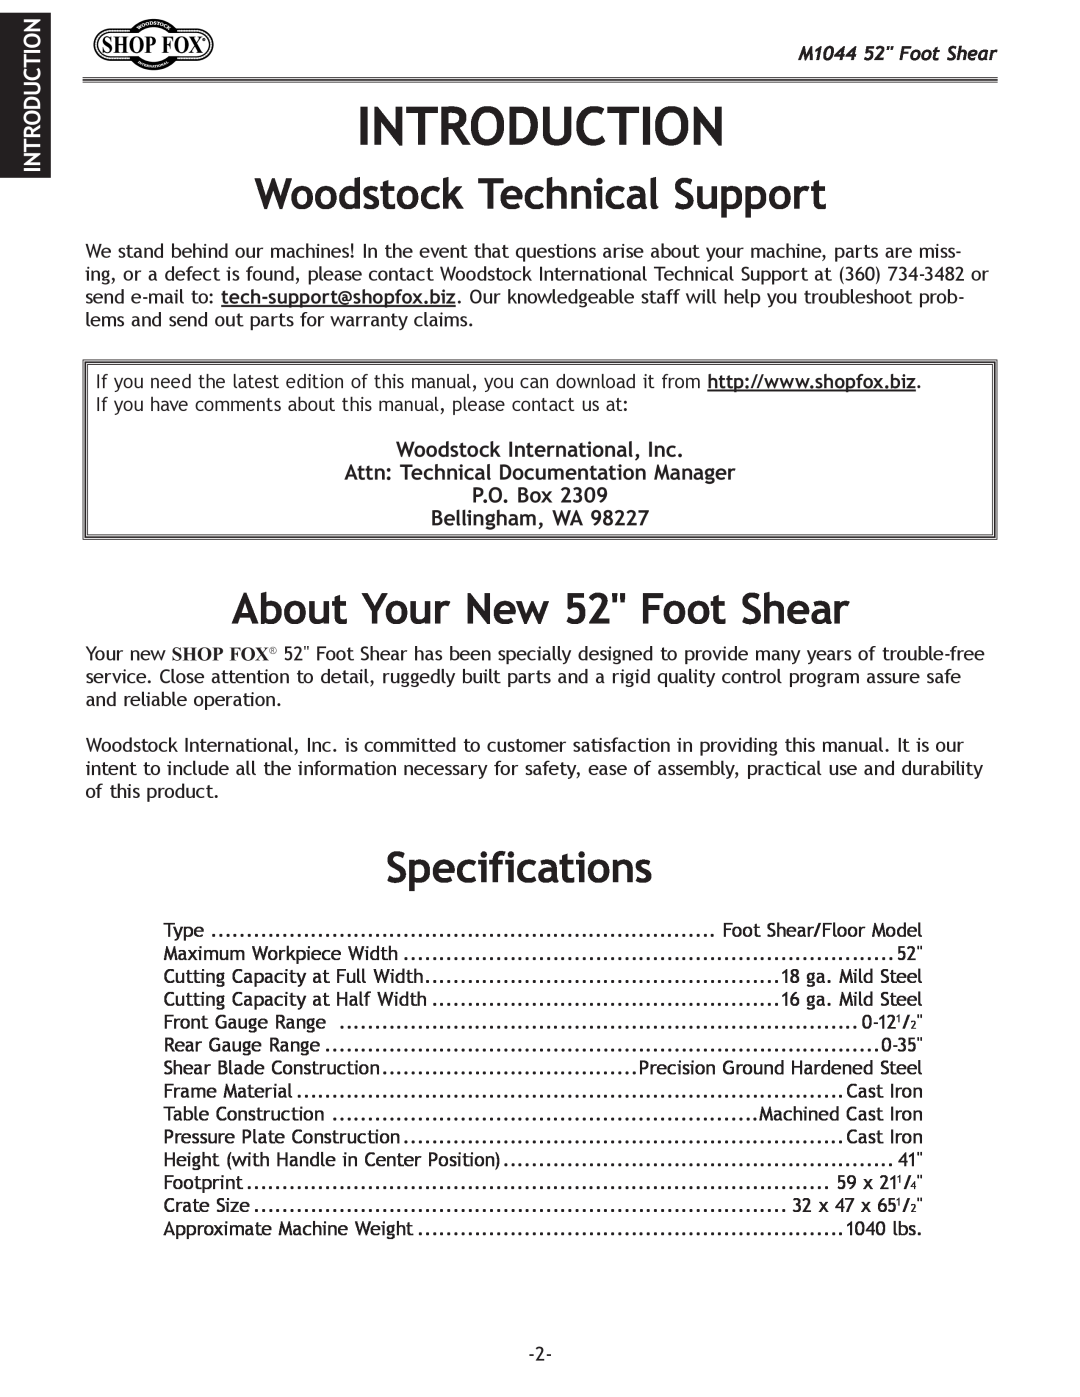 Woodstock M1044 manual Introduction, Woodstock Technical Support, About Your New 52 Foot Shear, Specifications 